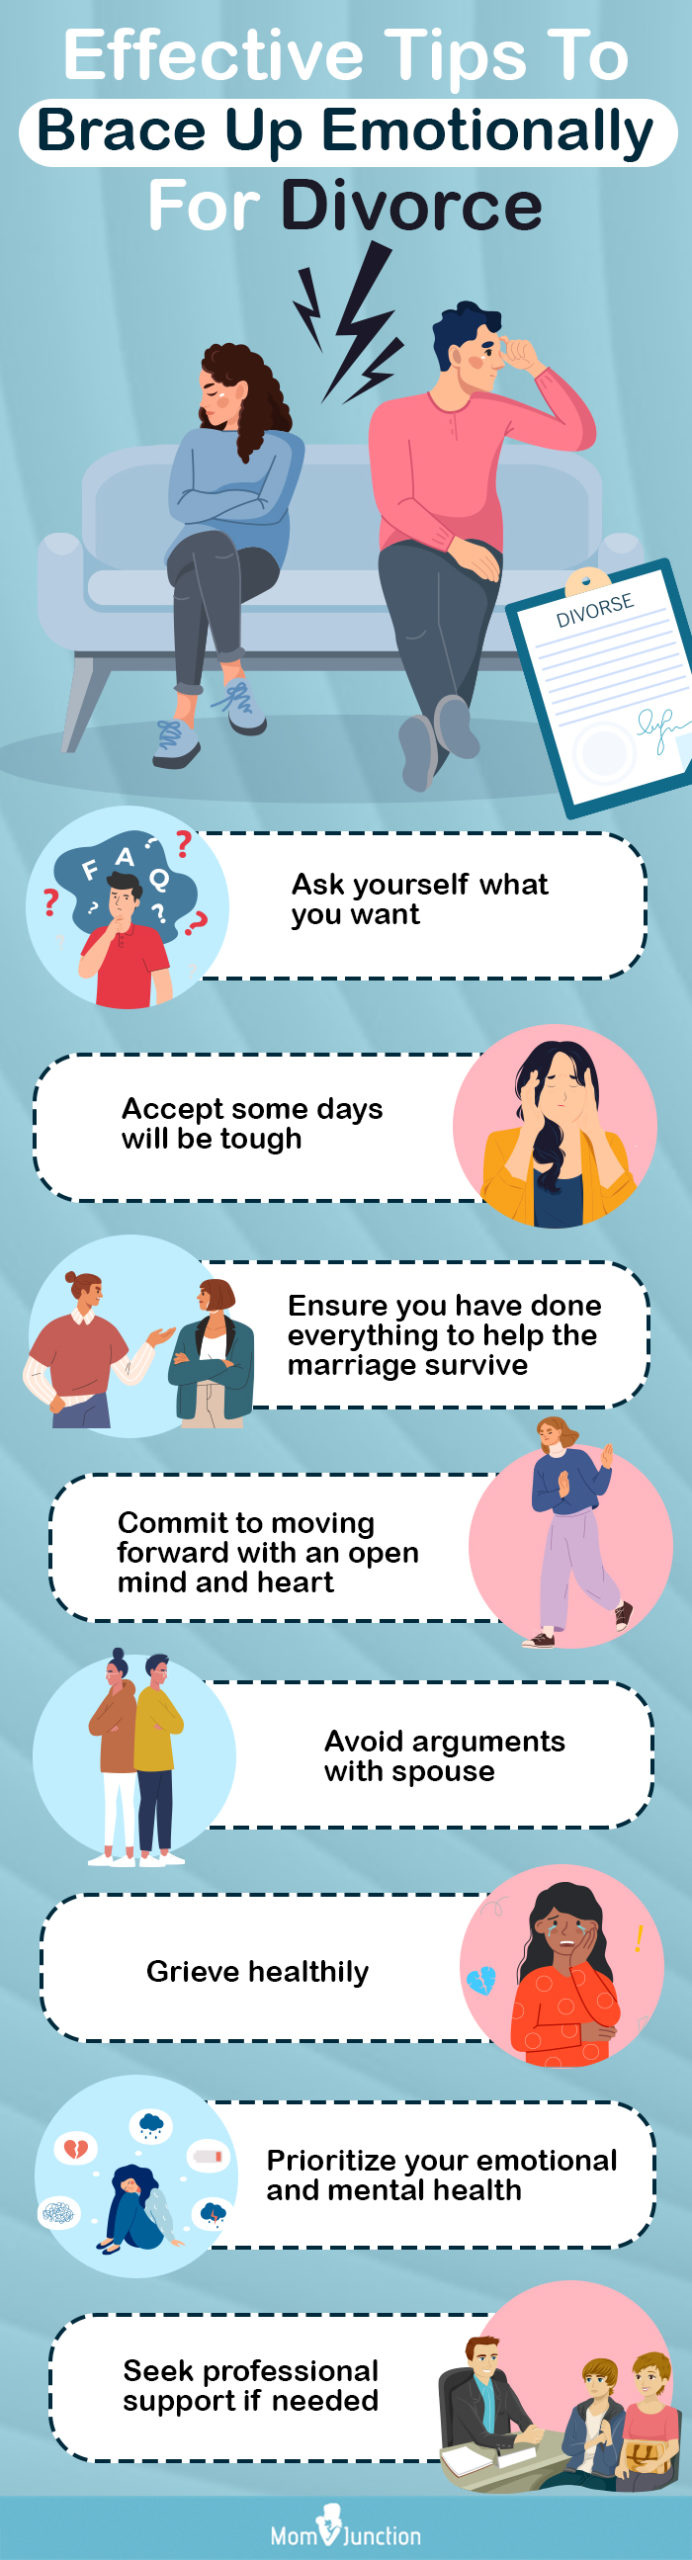 tips to brace up emotionally for divorce [infographic]